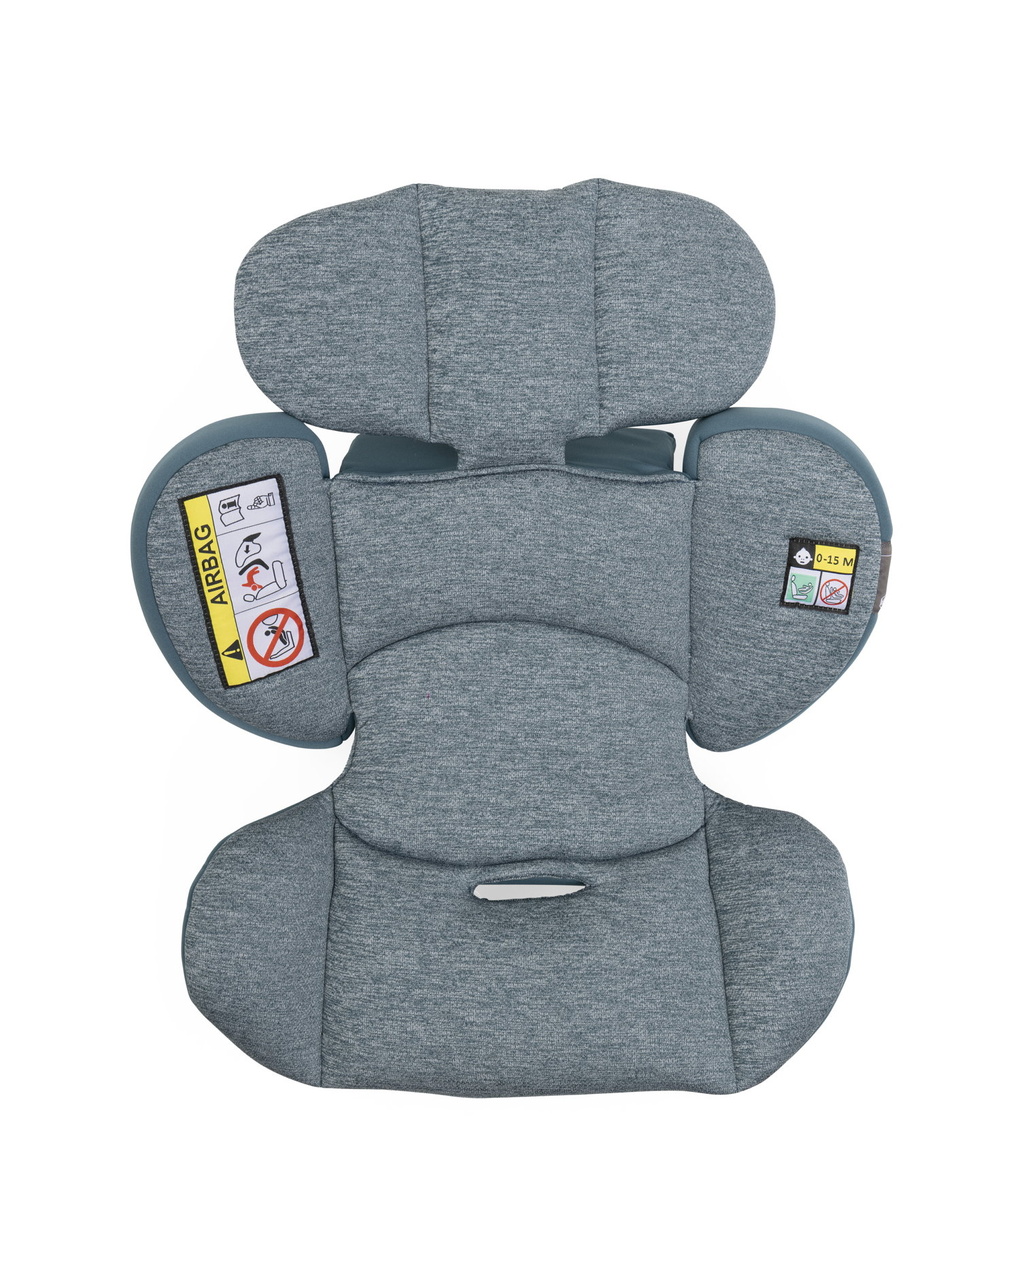 Chicco seat3fit i-size air (40-125 cm) teal melange - chicco - Chicco